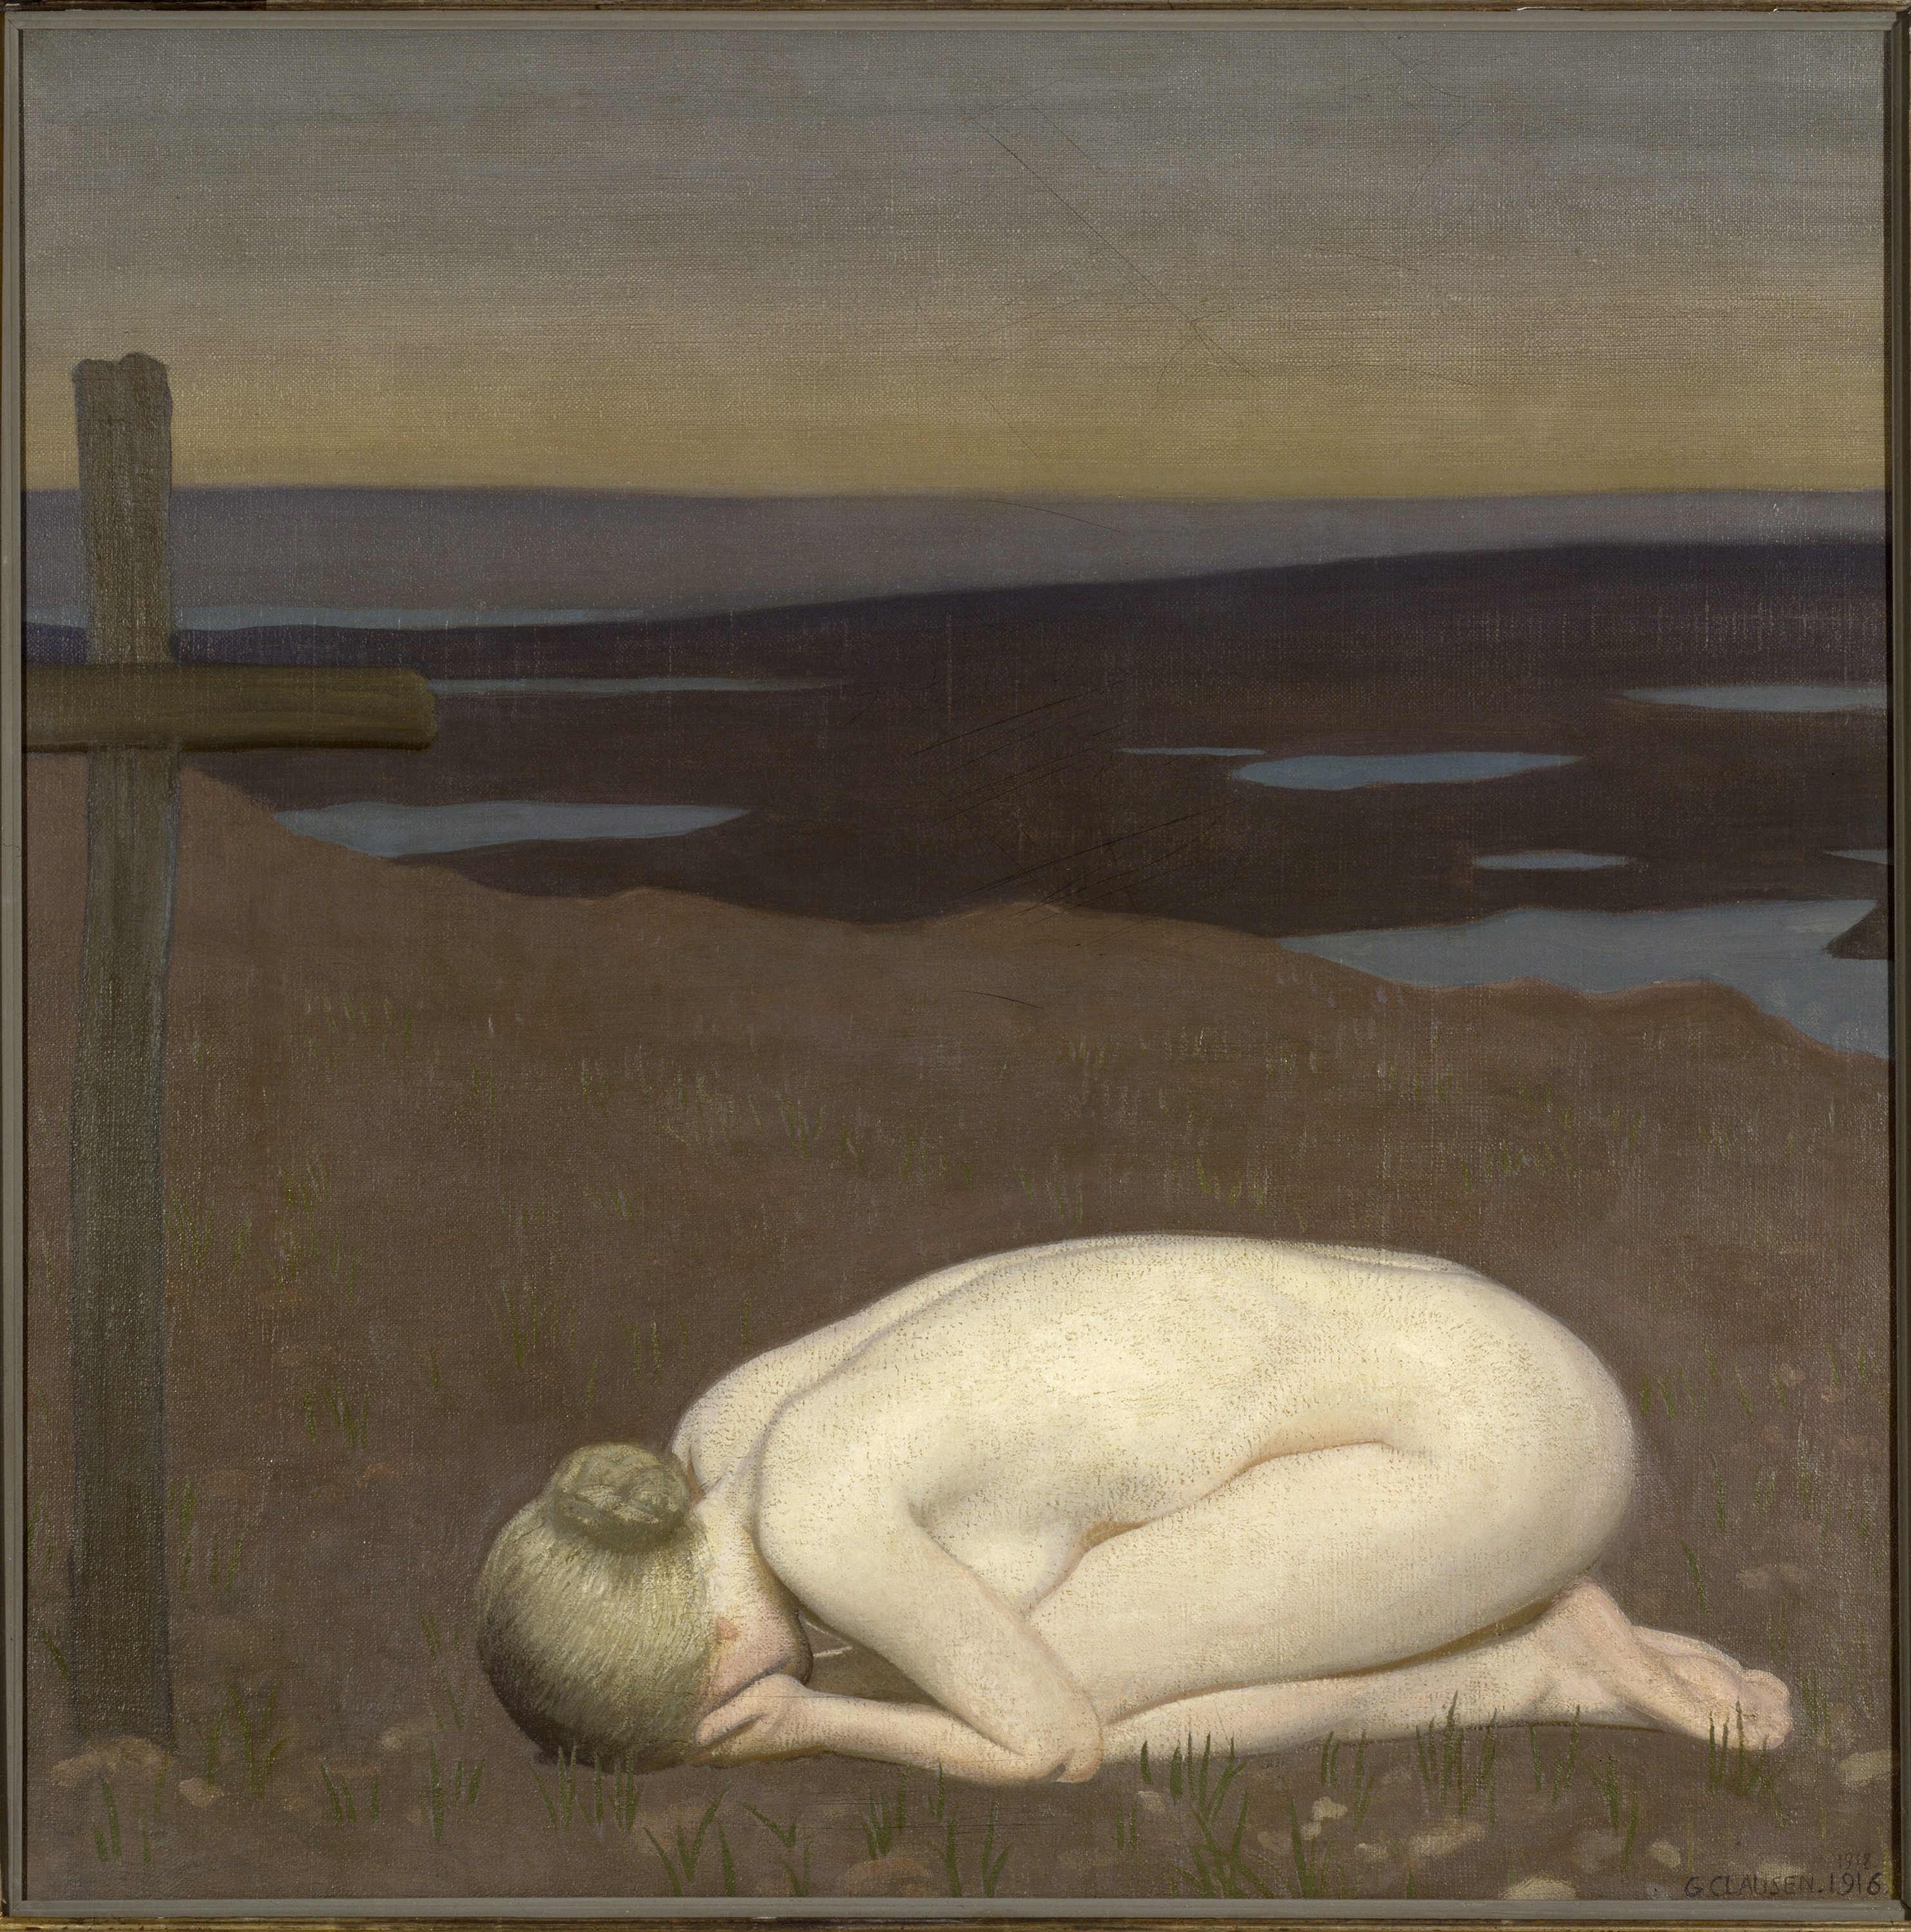 Youth Mourning by George Clausen - 1916 - 91.4 x 91.4 cm 